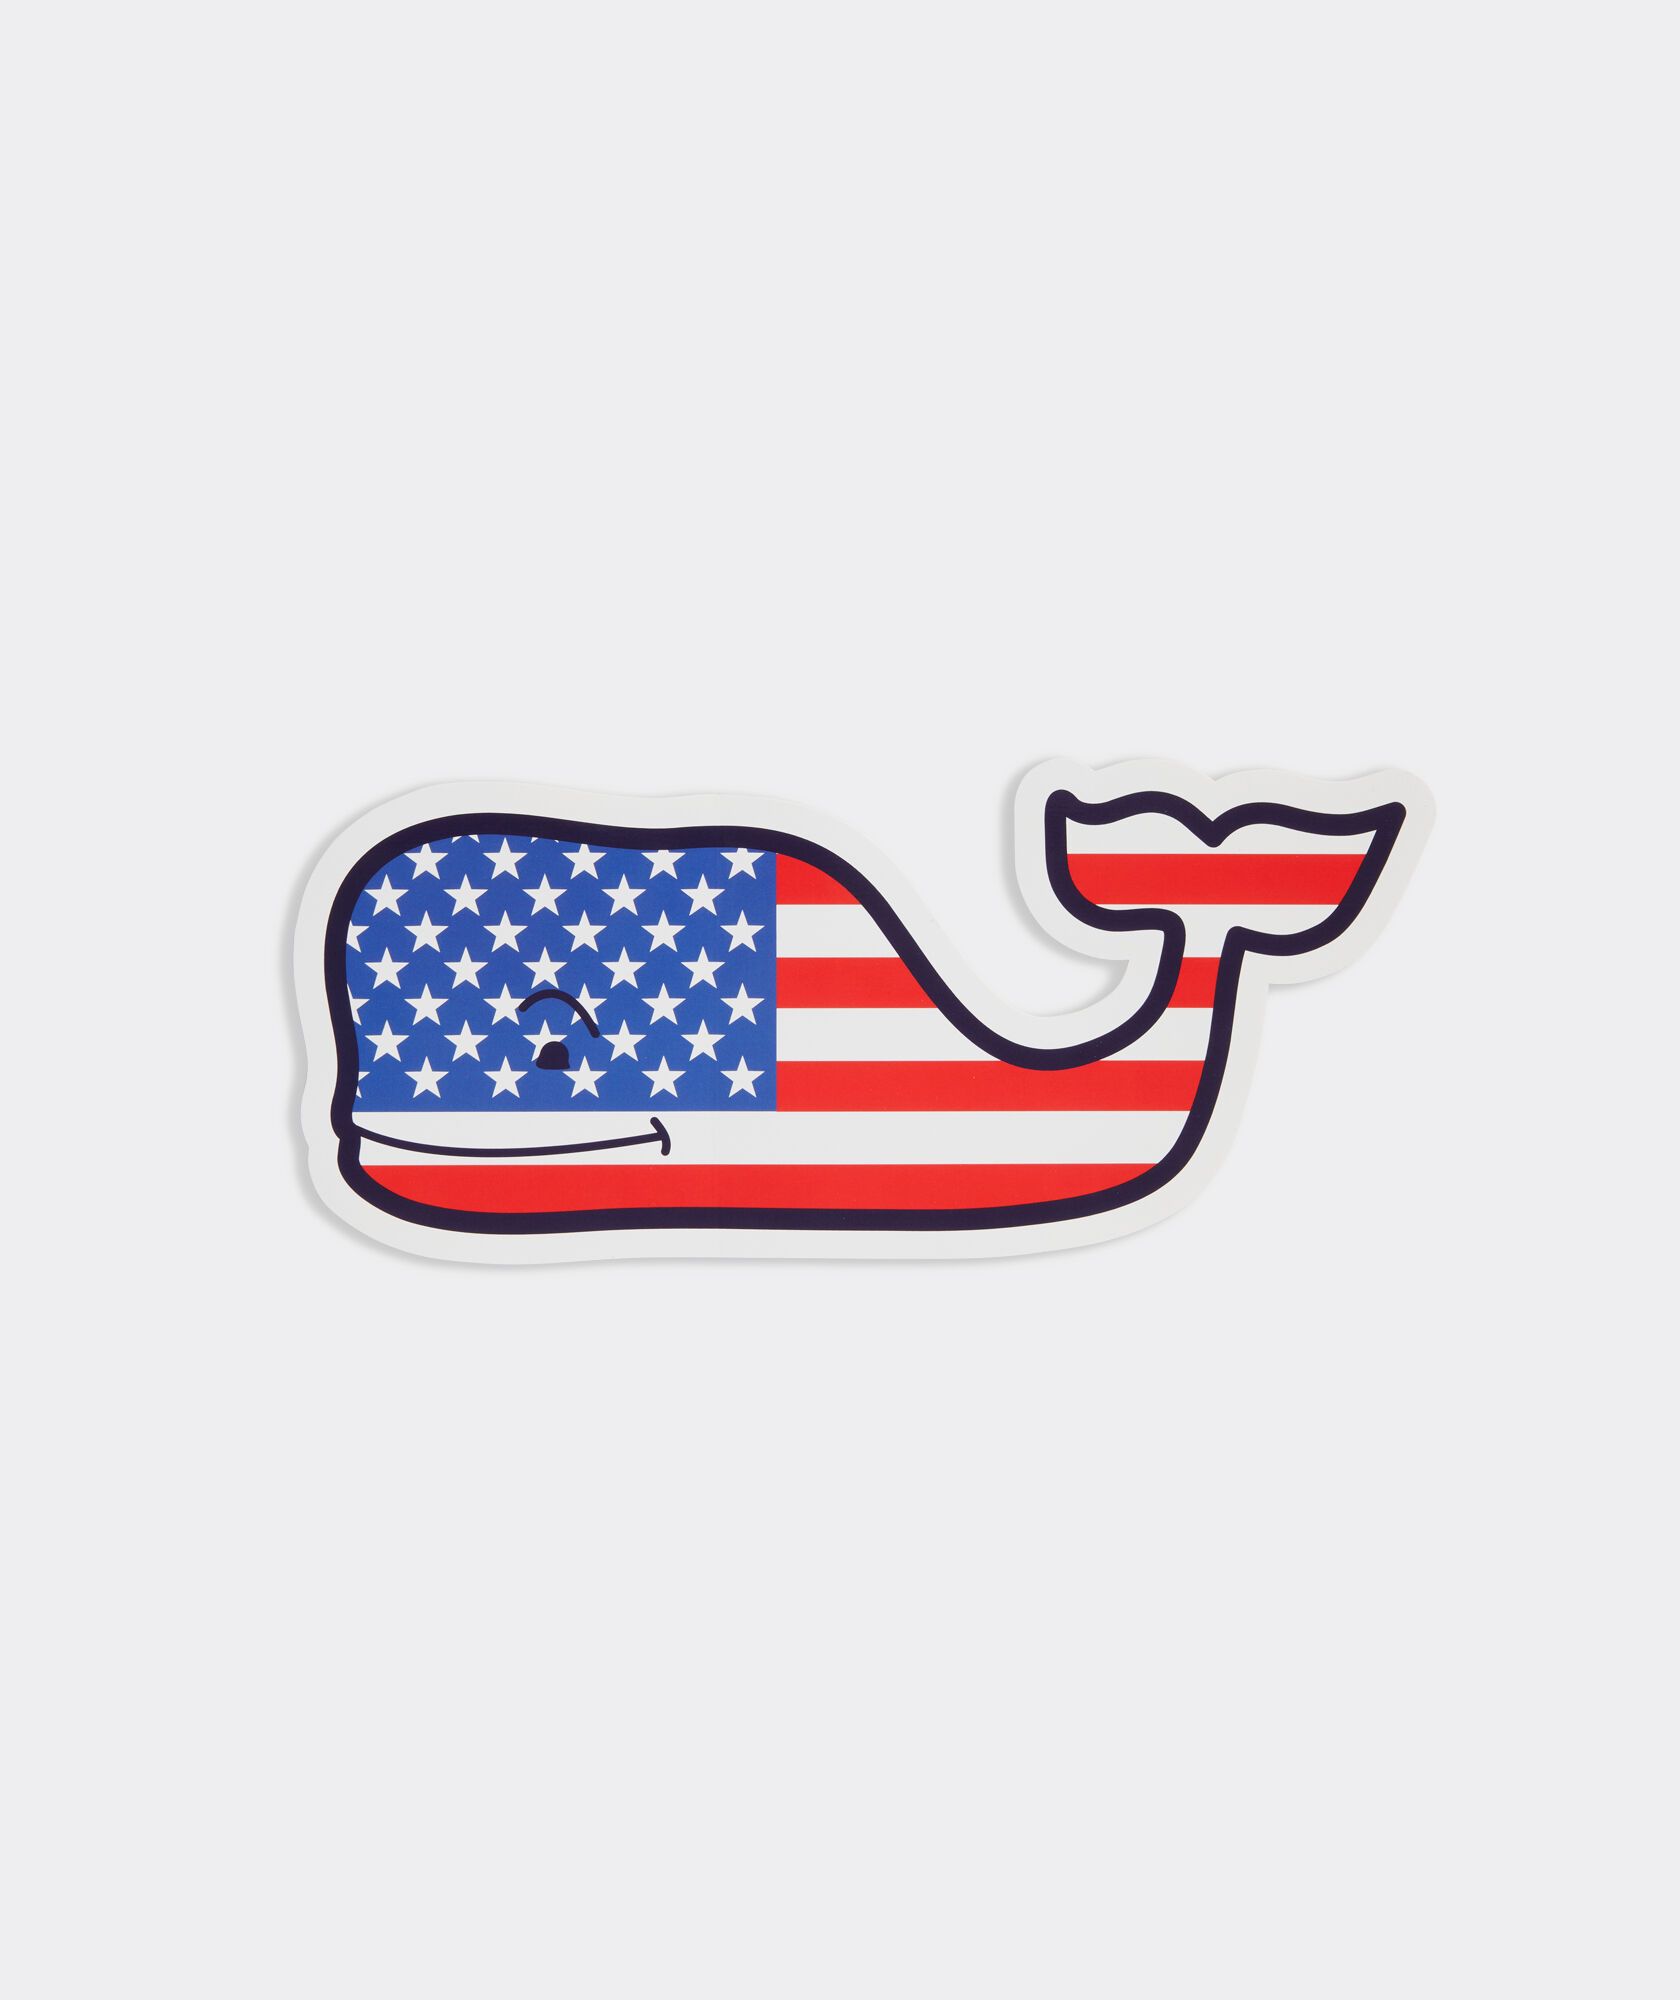 VINEYARD VINE WHALE RED STICKER DECAL SOUTHERN PROPER